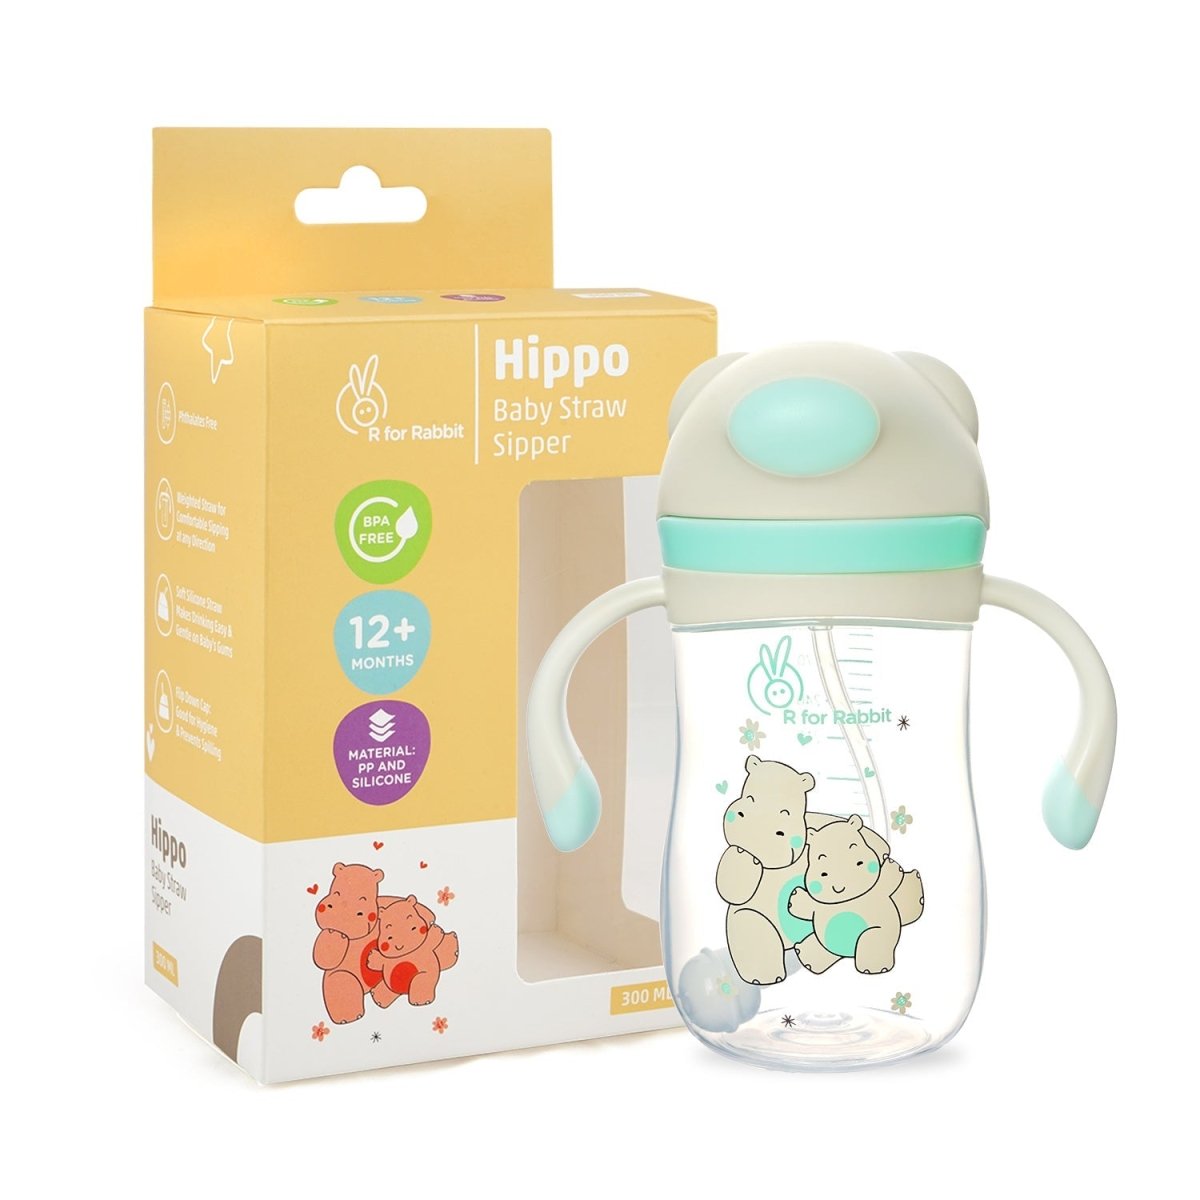 R for Rabbit Hippo Baby Straw Sipper- Green - SIHPG01